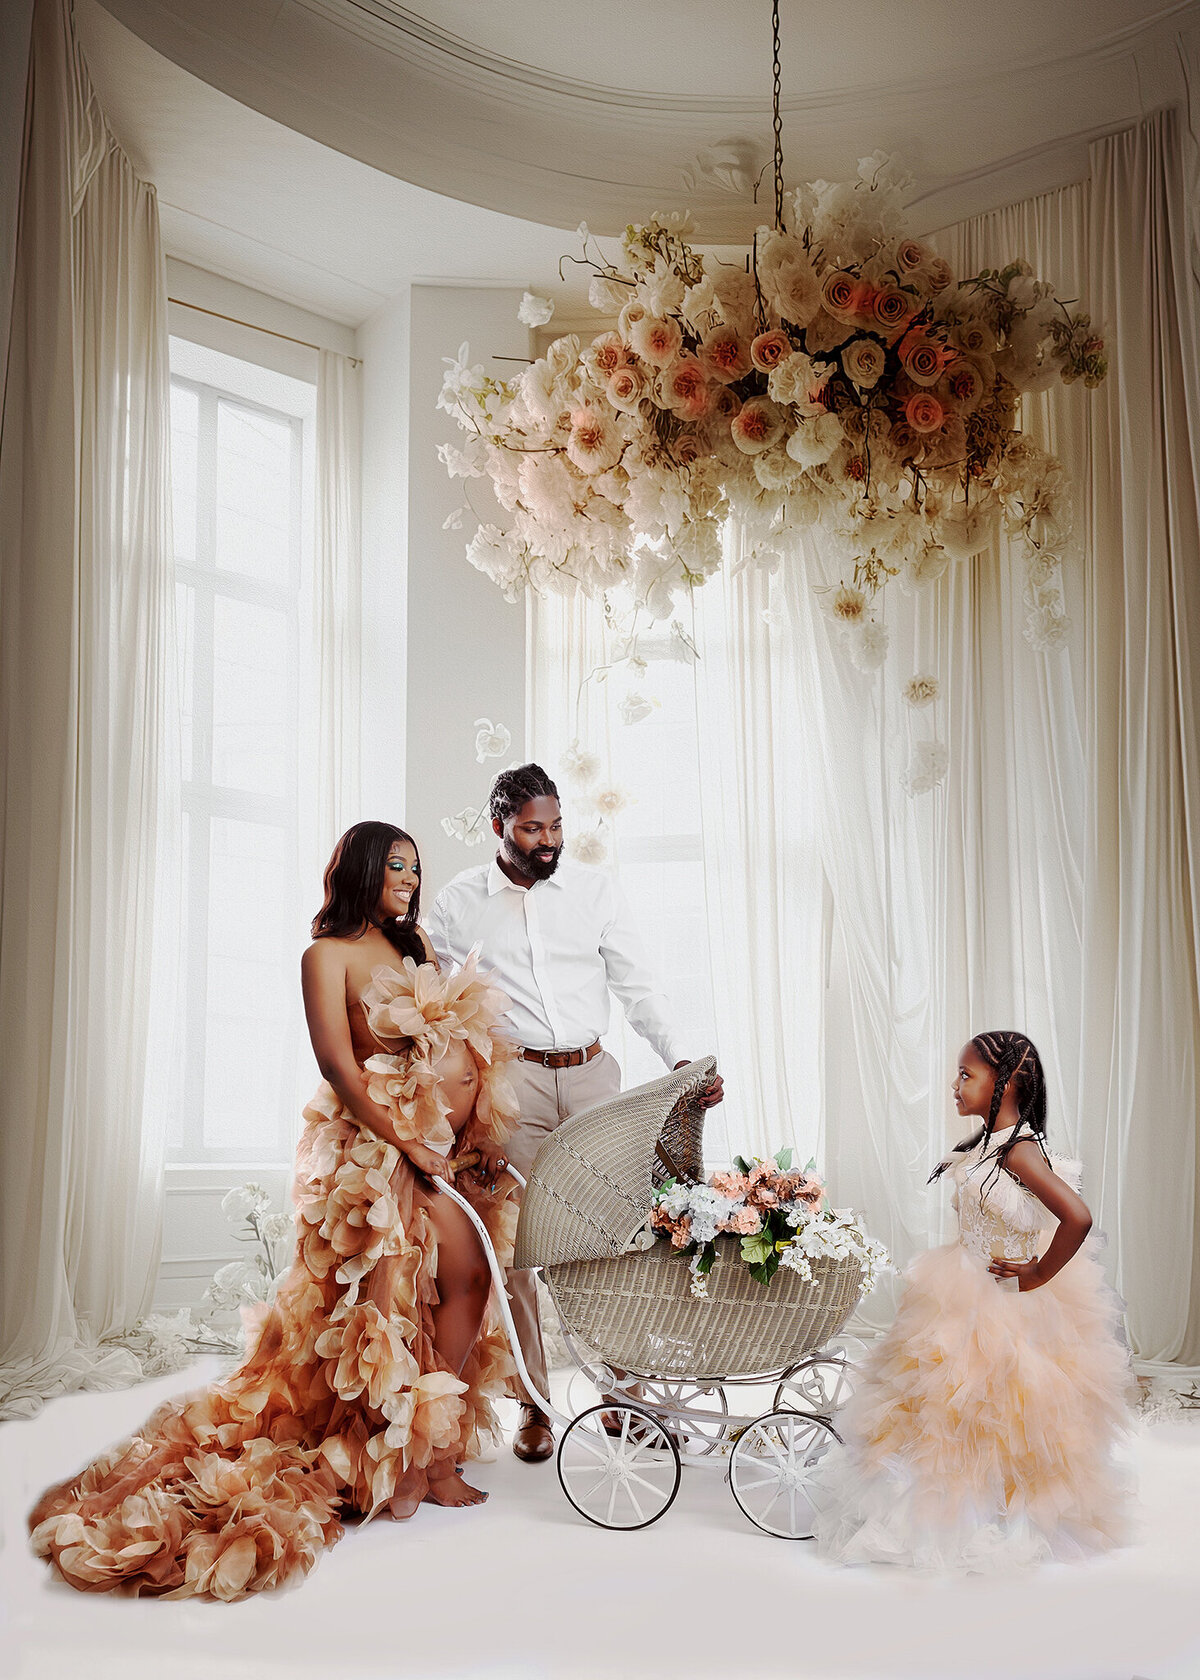 Expecting family portrait with mom and daughter wearing brown and tan gowns and dad in formal attire, posing with vintage pram in a beautiful room background with hanging floral arrangement